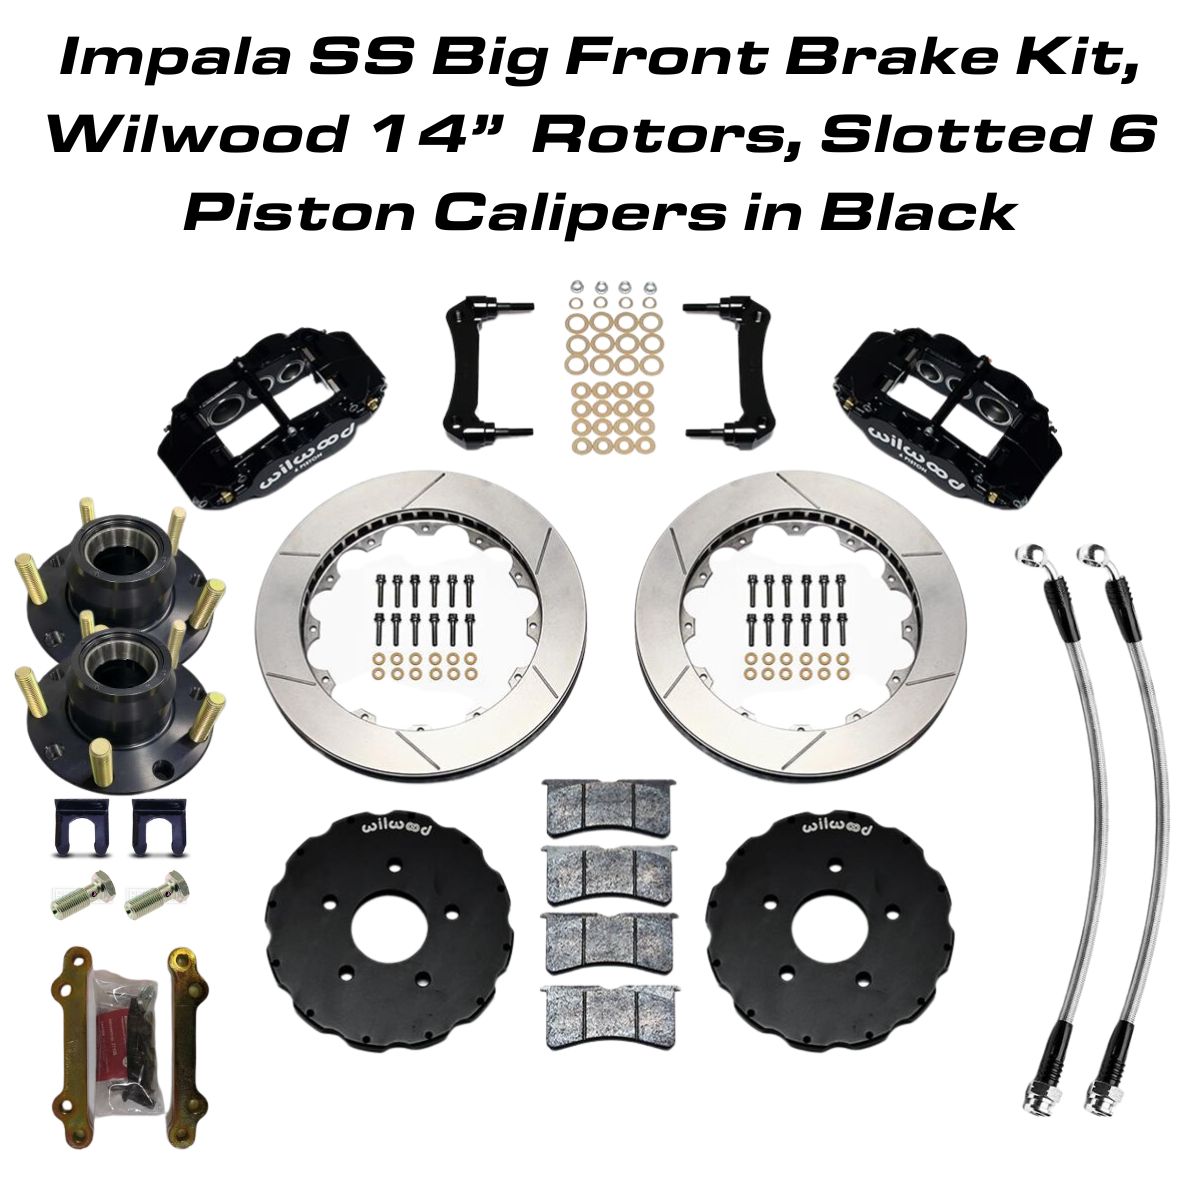 Impala SS Big Front Brake Kit, 14 Inch Wilwood Rotors, 6 Piston Forged Calipers - Slotted, Black Calipers